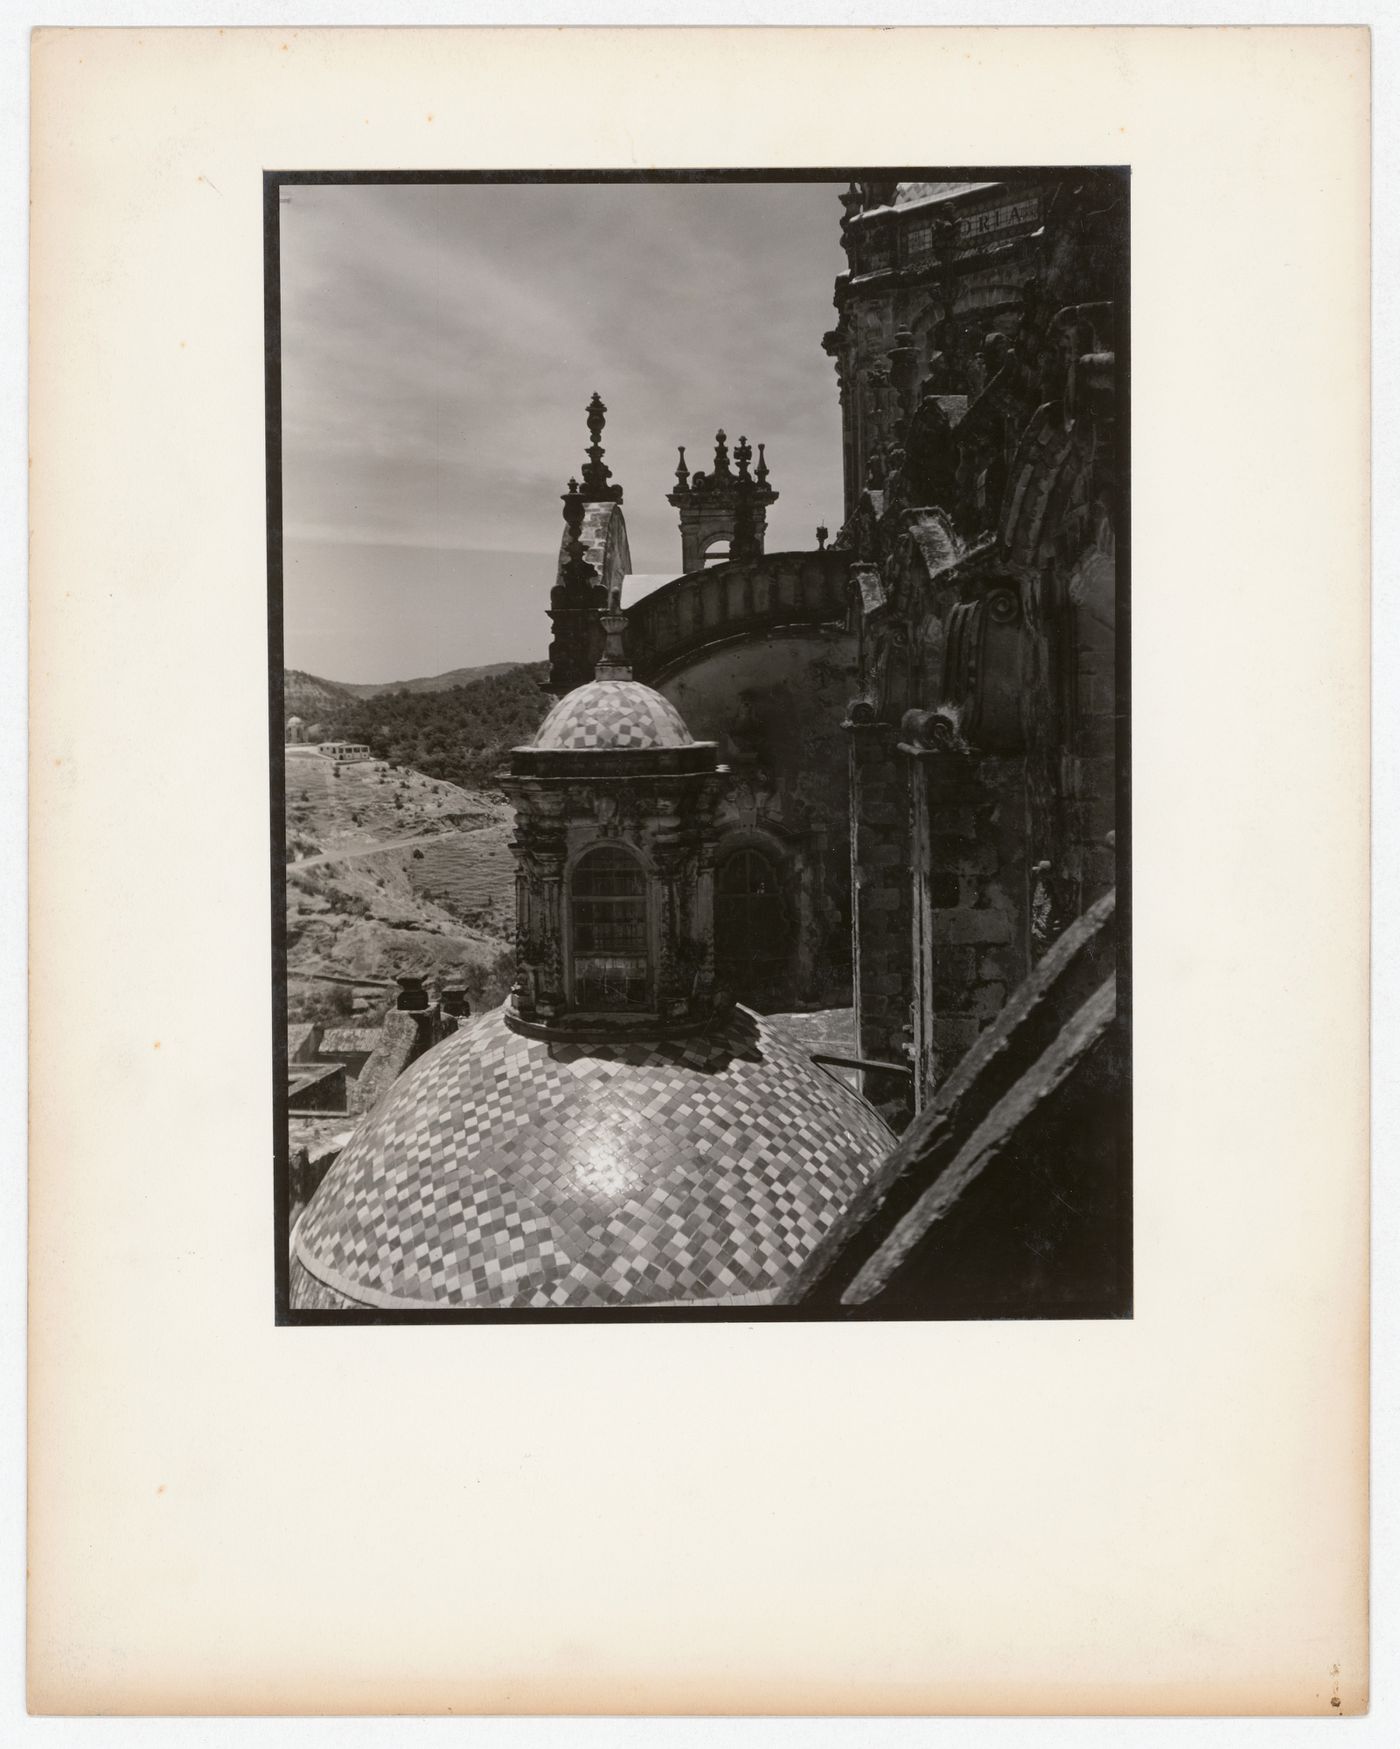 View of the dome of a chapel of Santa Prisca with hills in the background, Taxco de Alarcón, Mexico